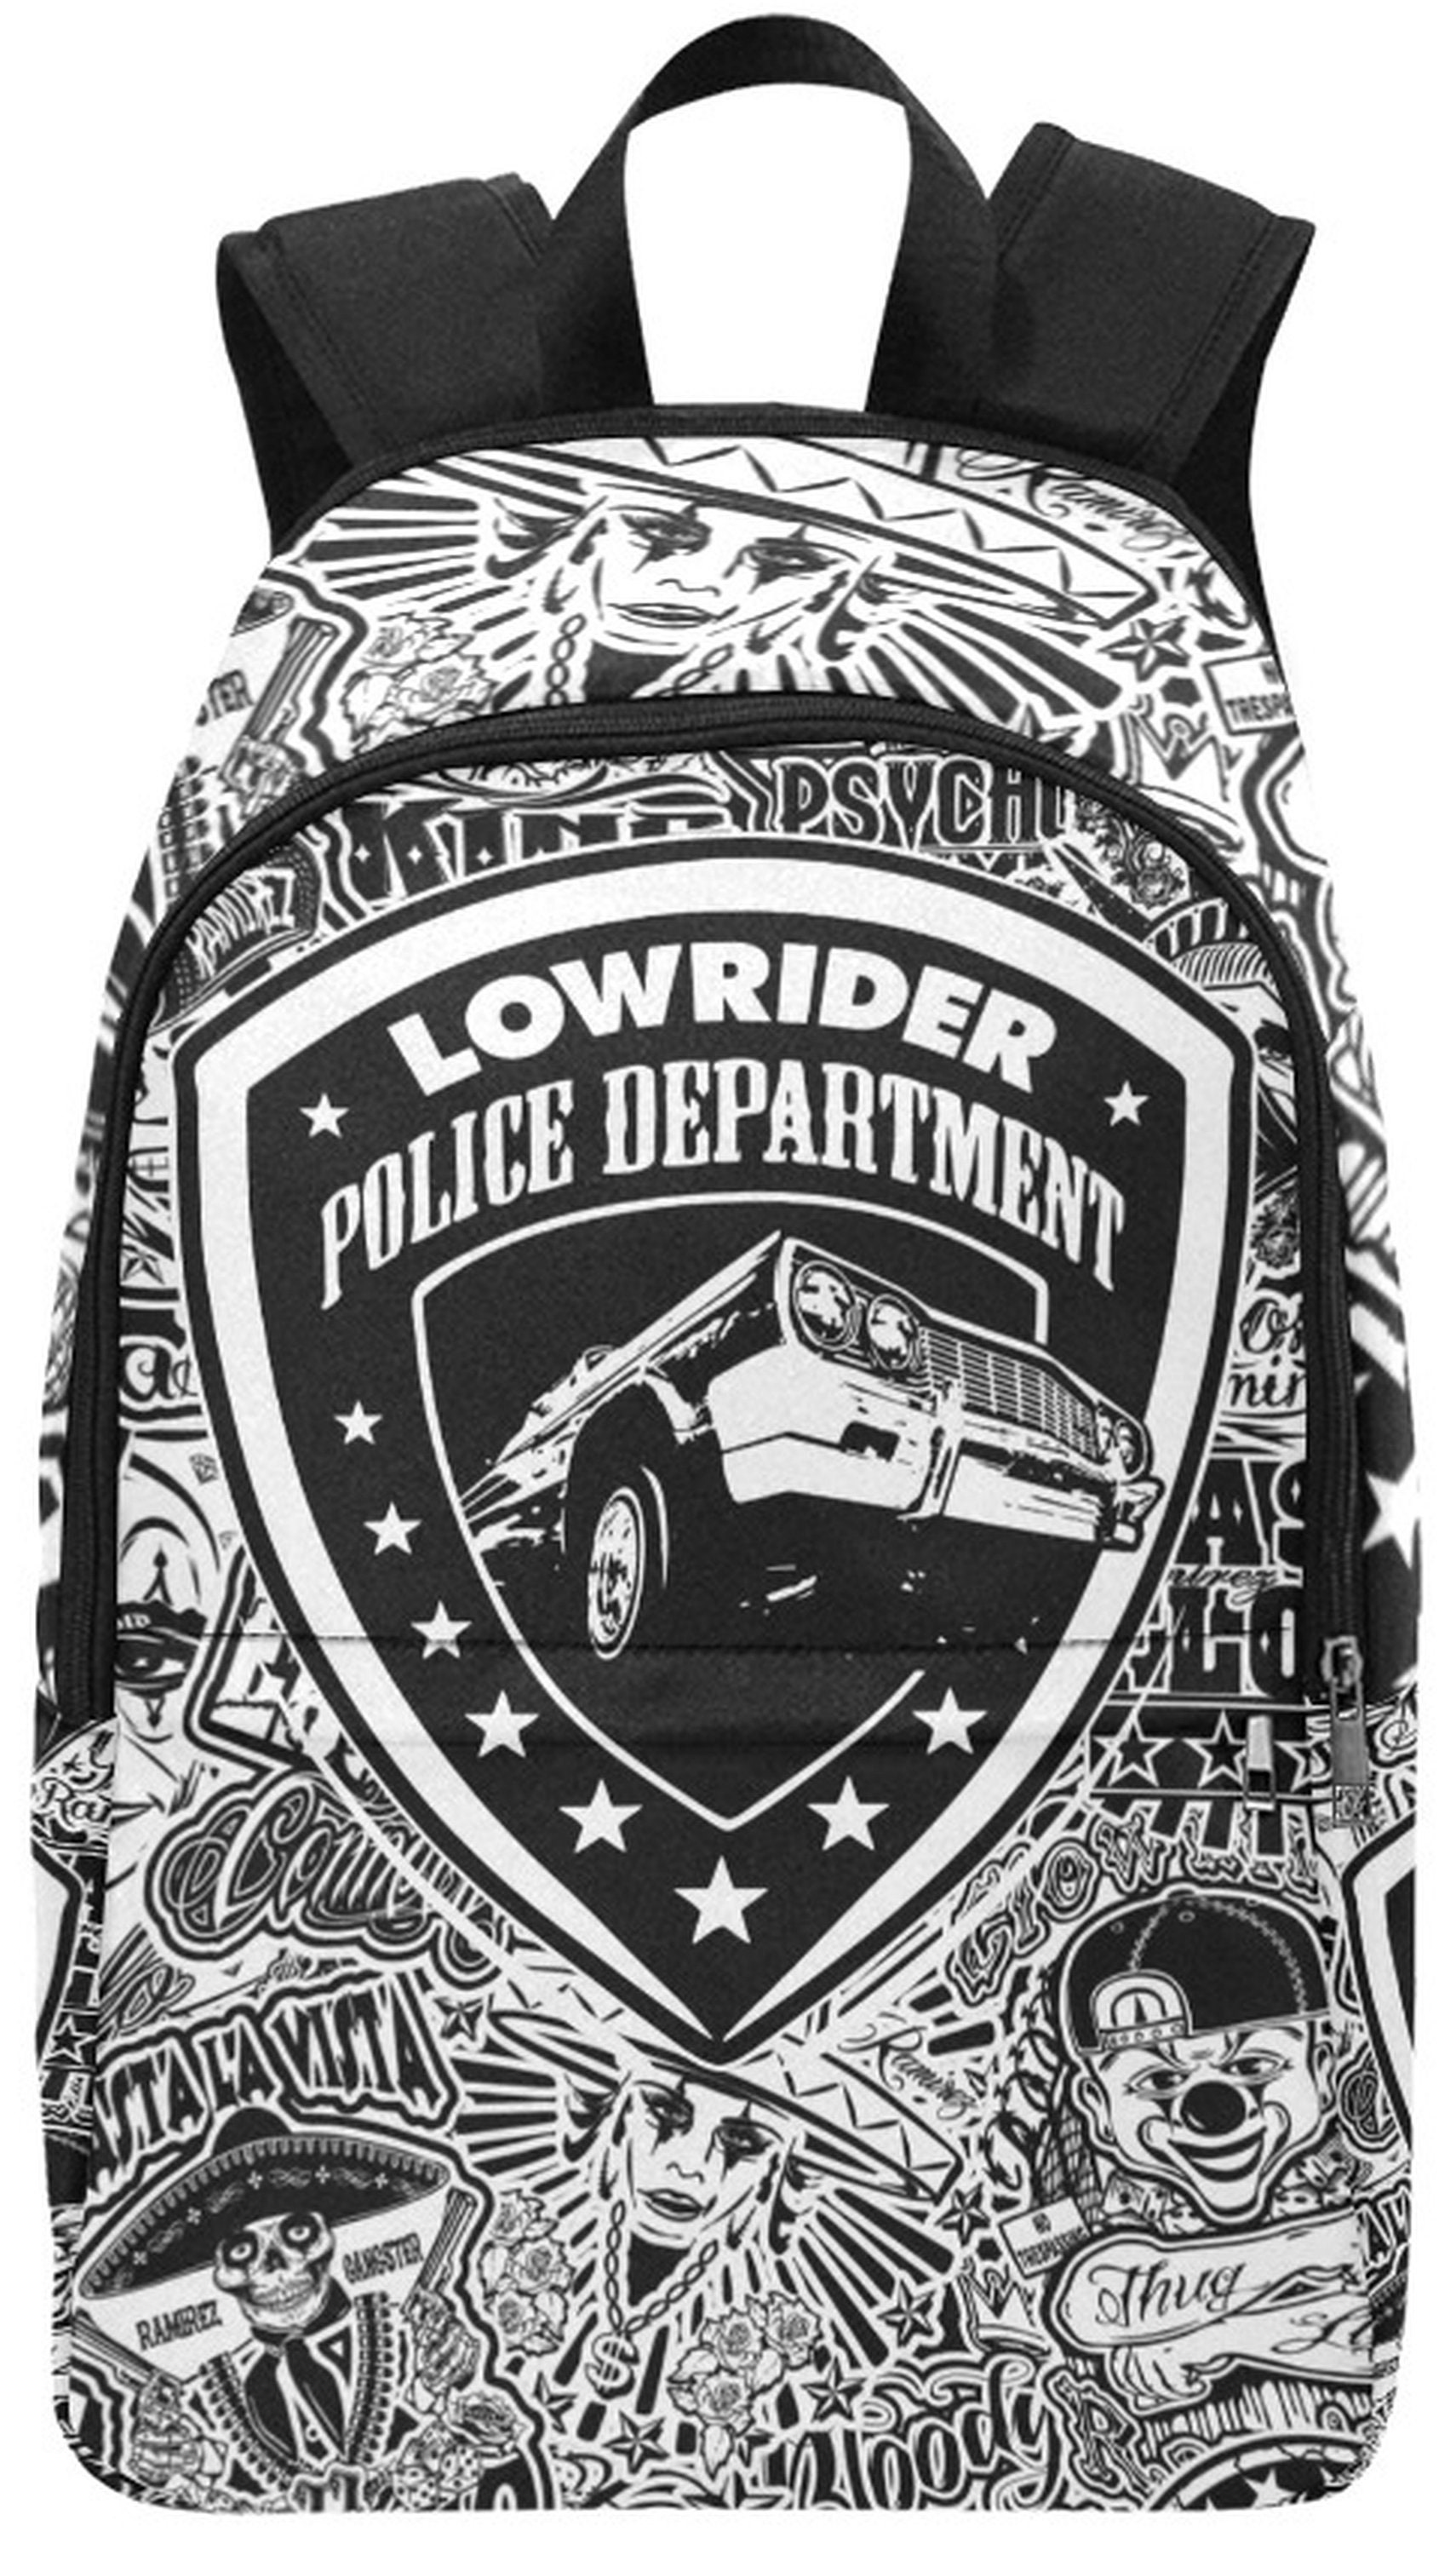 low rider backpack black